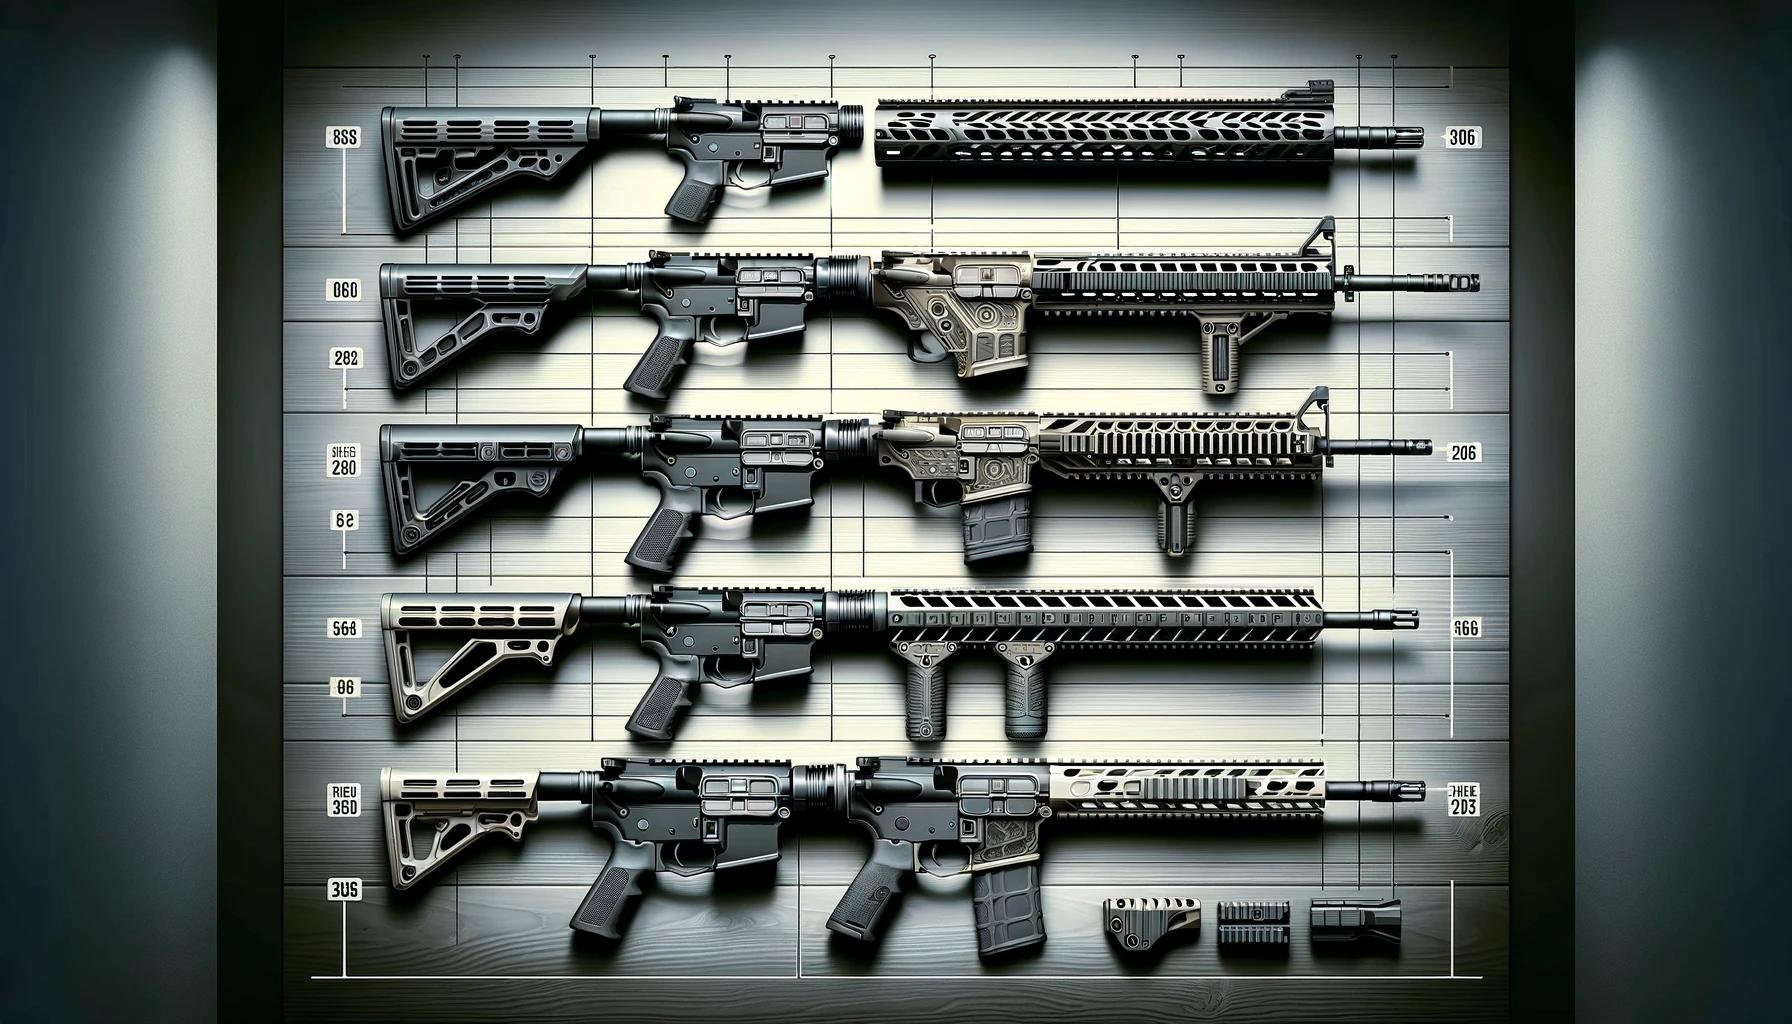 DALL·E 2024 05 22 07.53.57 A detailed image depicting the evolution of AR 15 handguards, starting from Picatinny to M LOK. The image should showcase various AR 15 handguards in